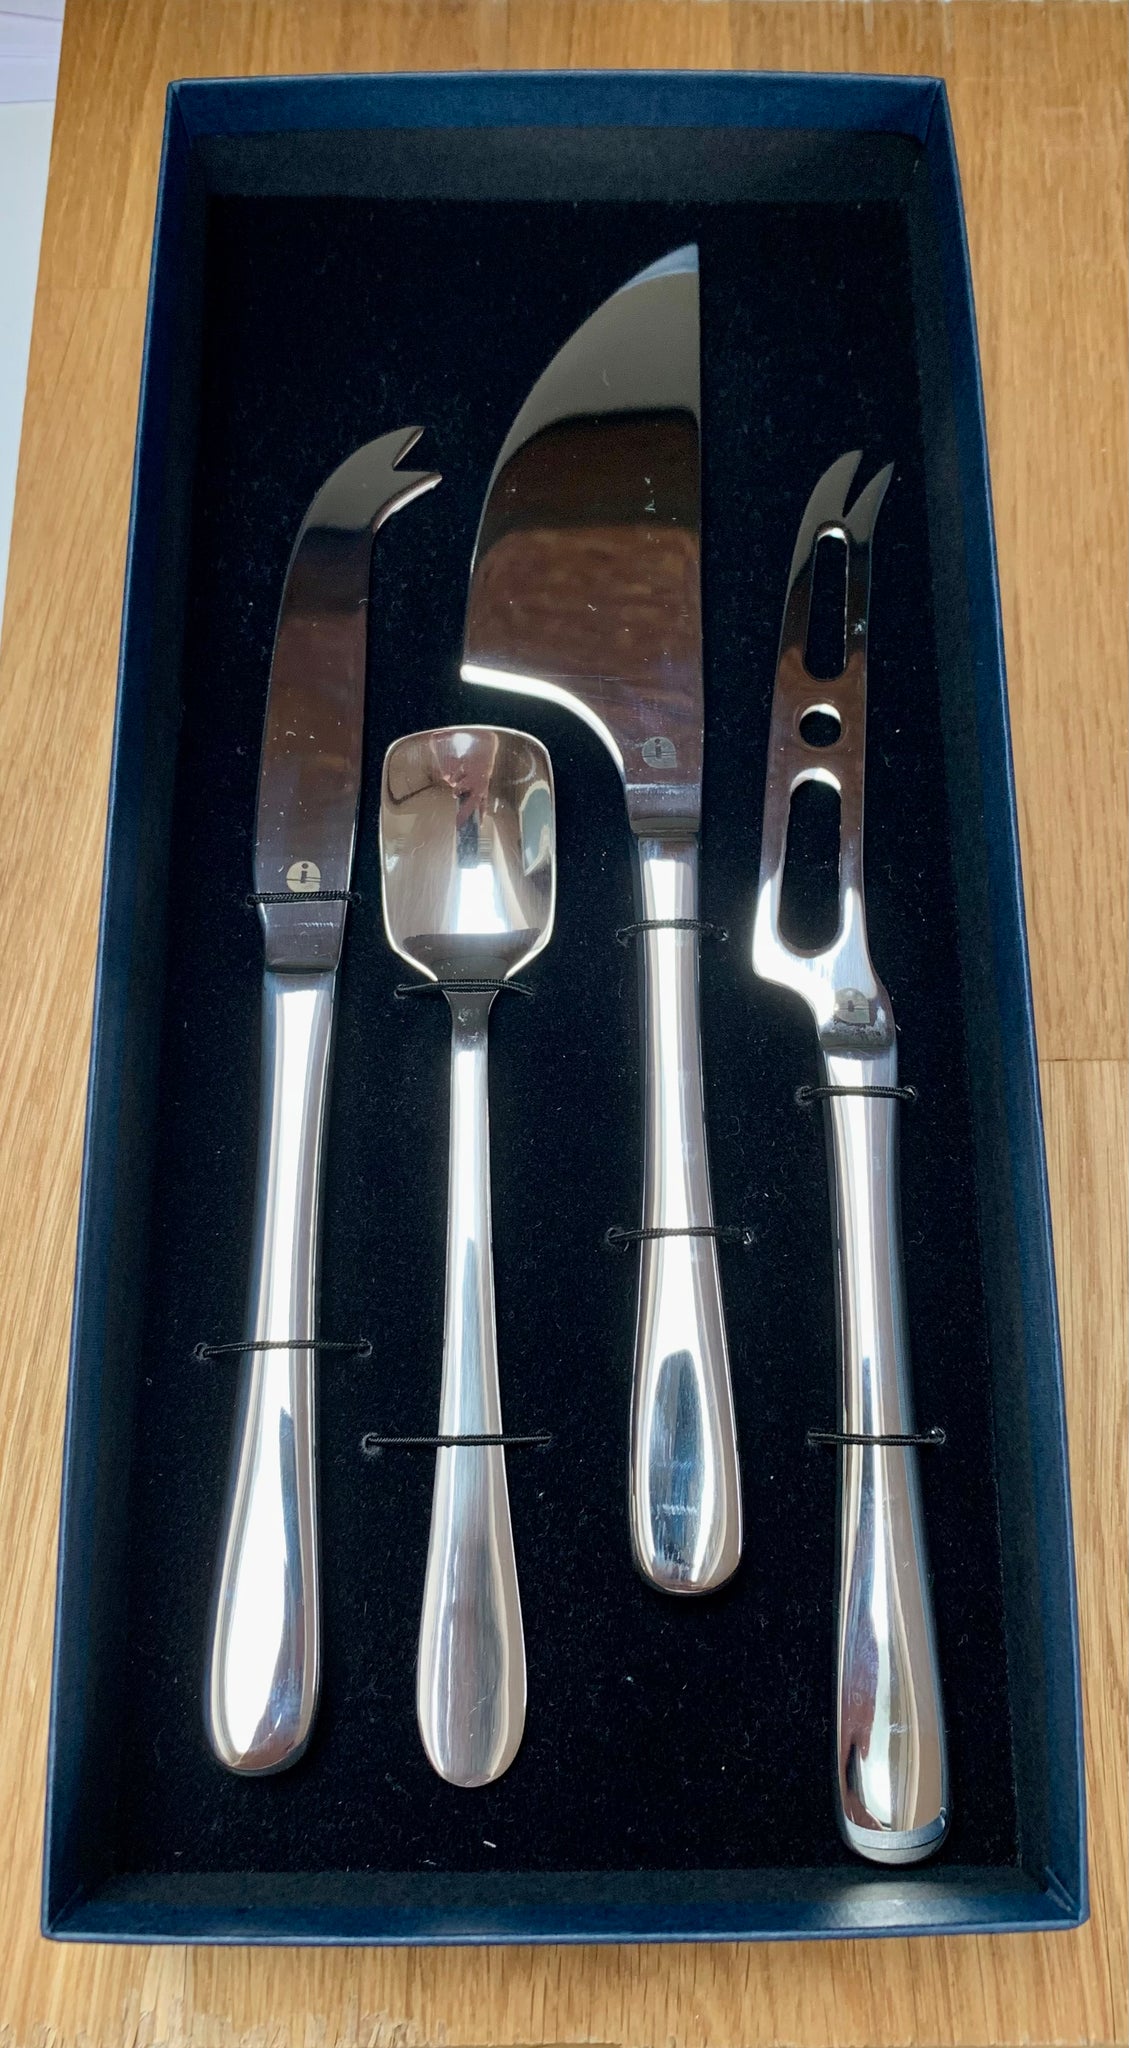 4 Piece Cheese Knife Set With Bespoke Presentation Box N.B. THIS ITEM IS NOT ENGRAVED